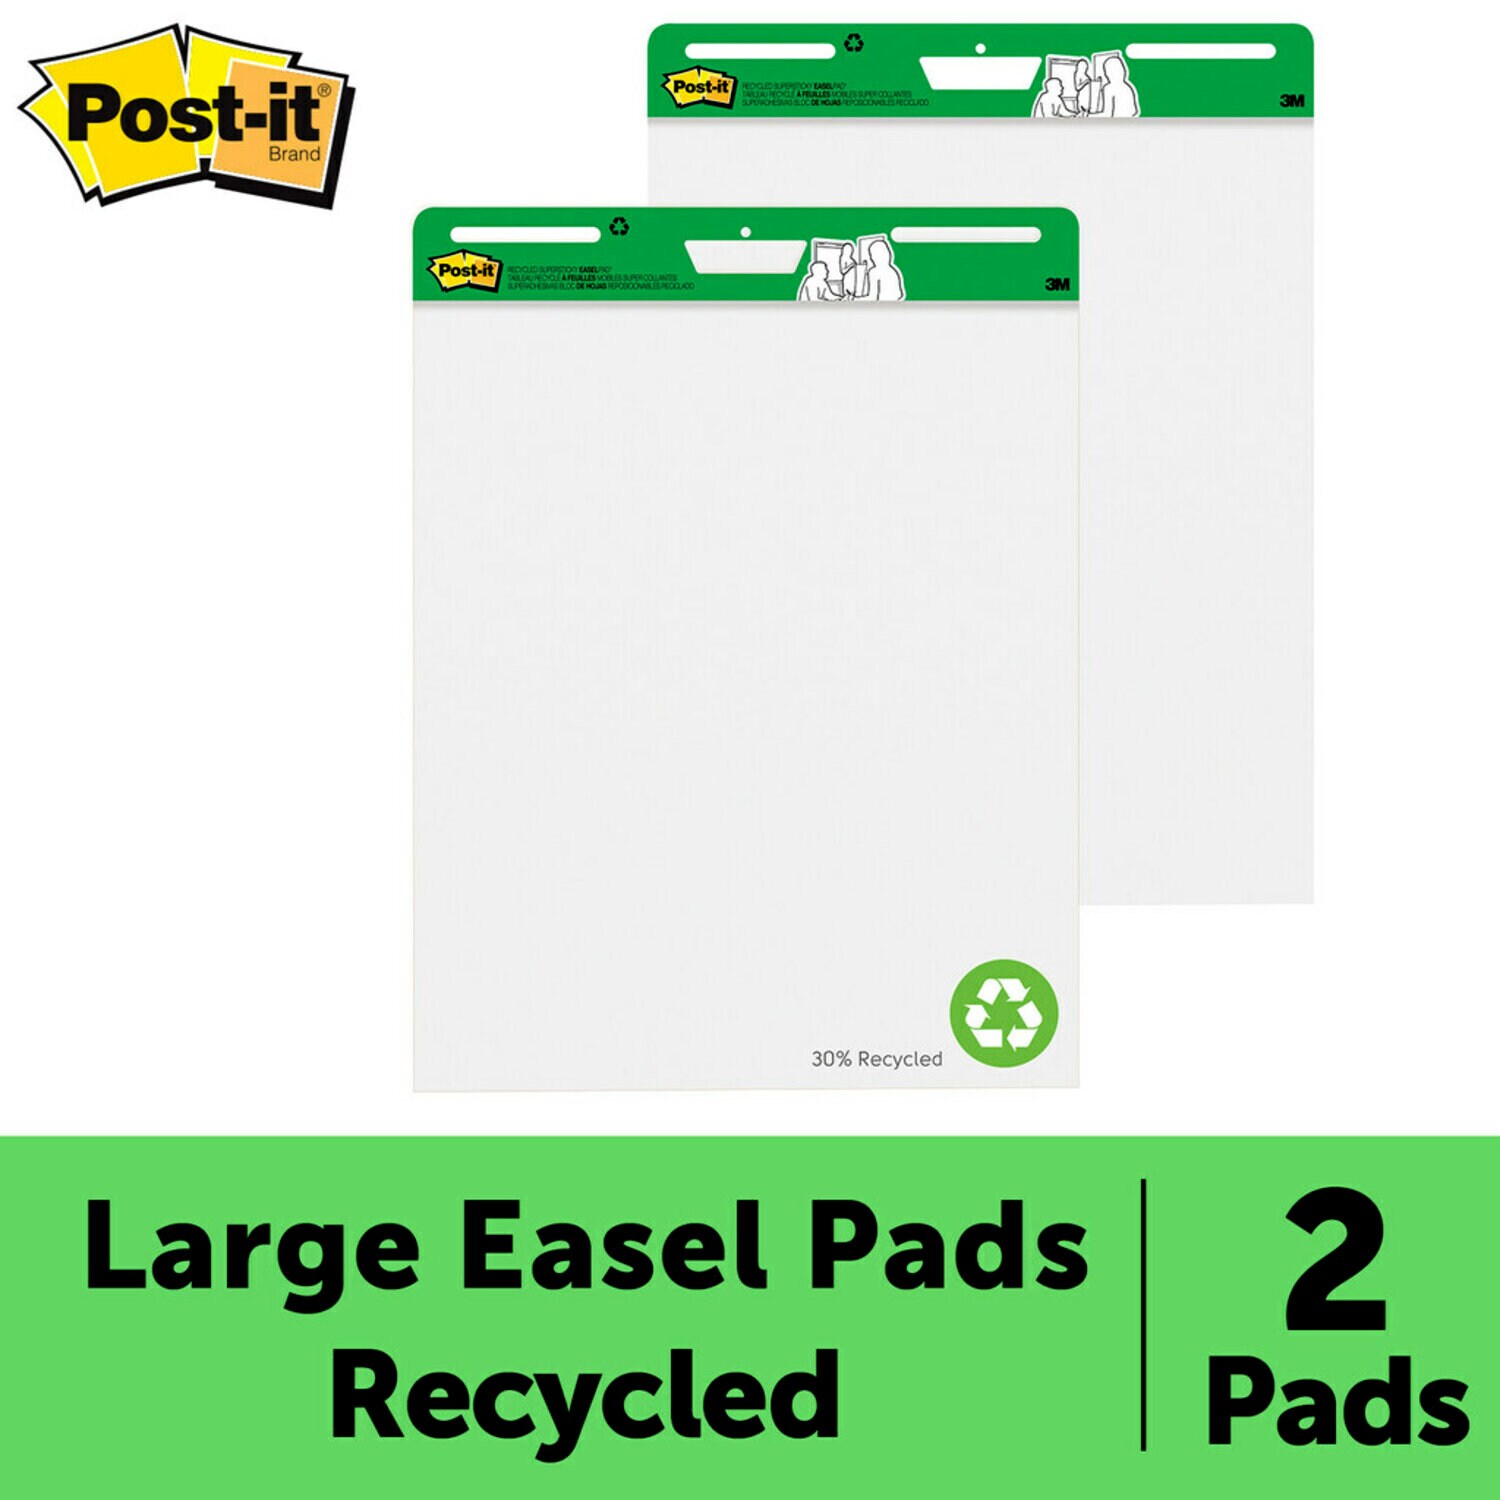 PAD LOC® PAC – Ready-to-use, self-adapting packaging material